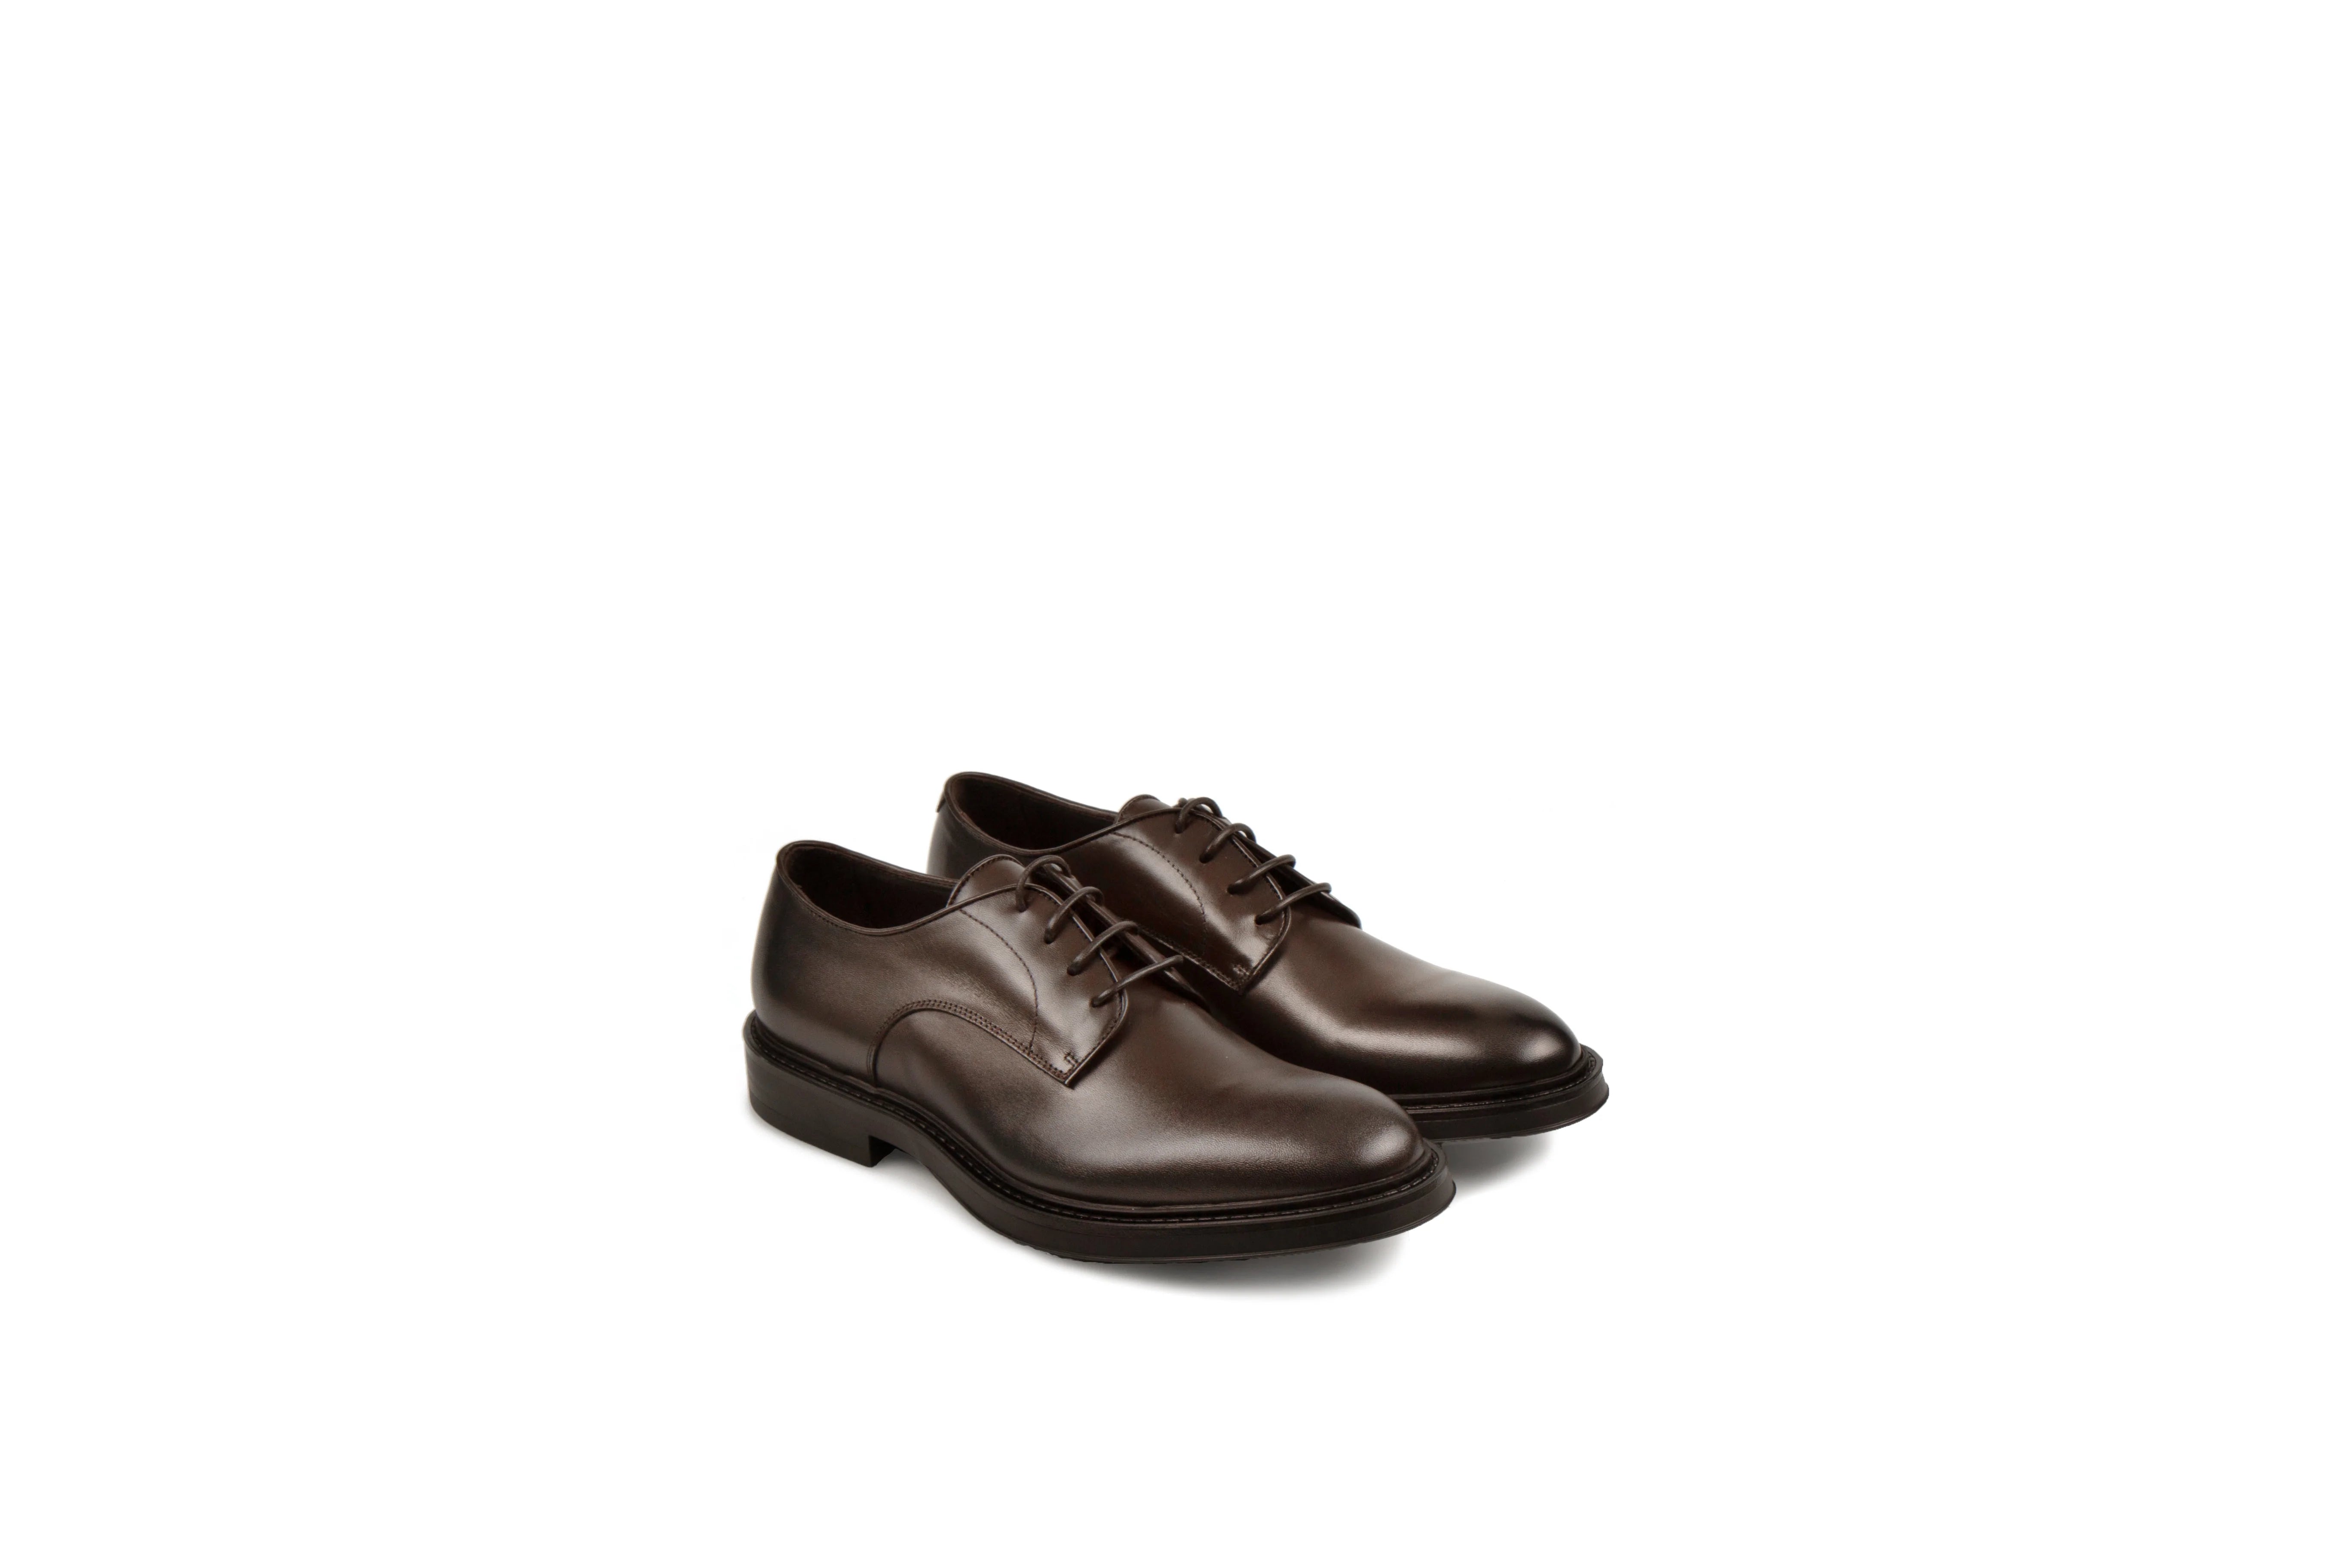 Link Tmoro Derby Calf Leather Shoes